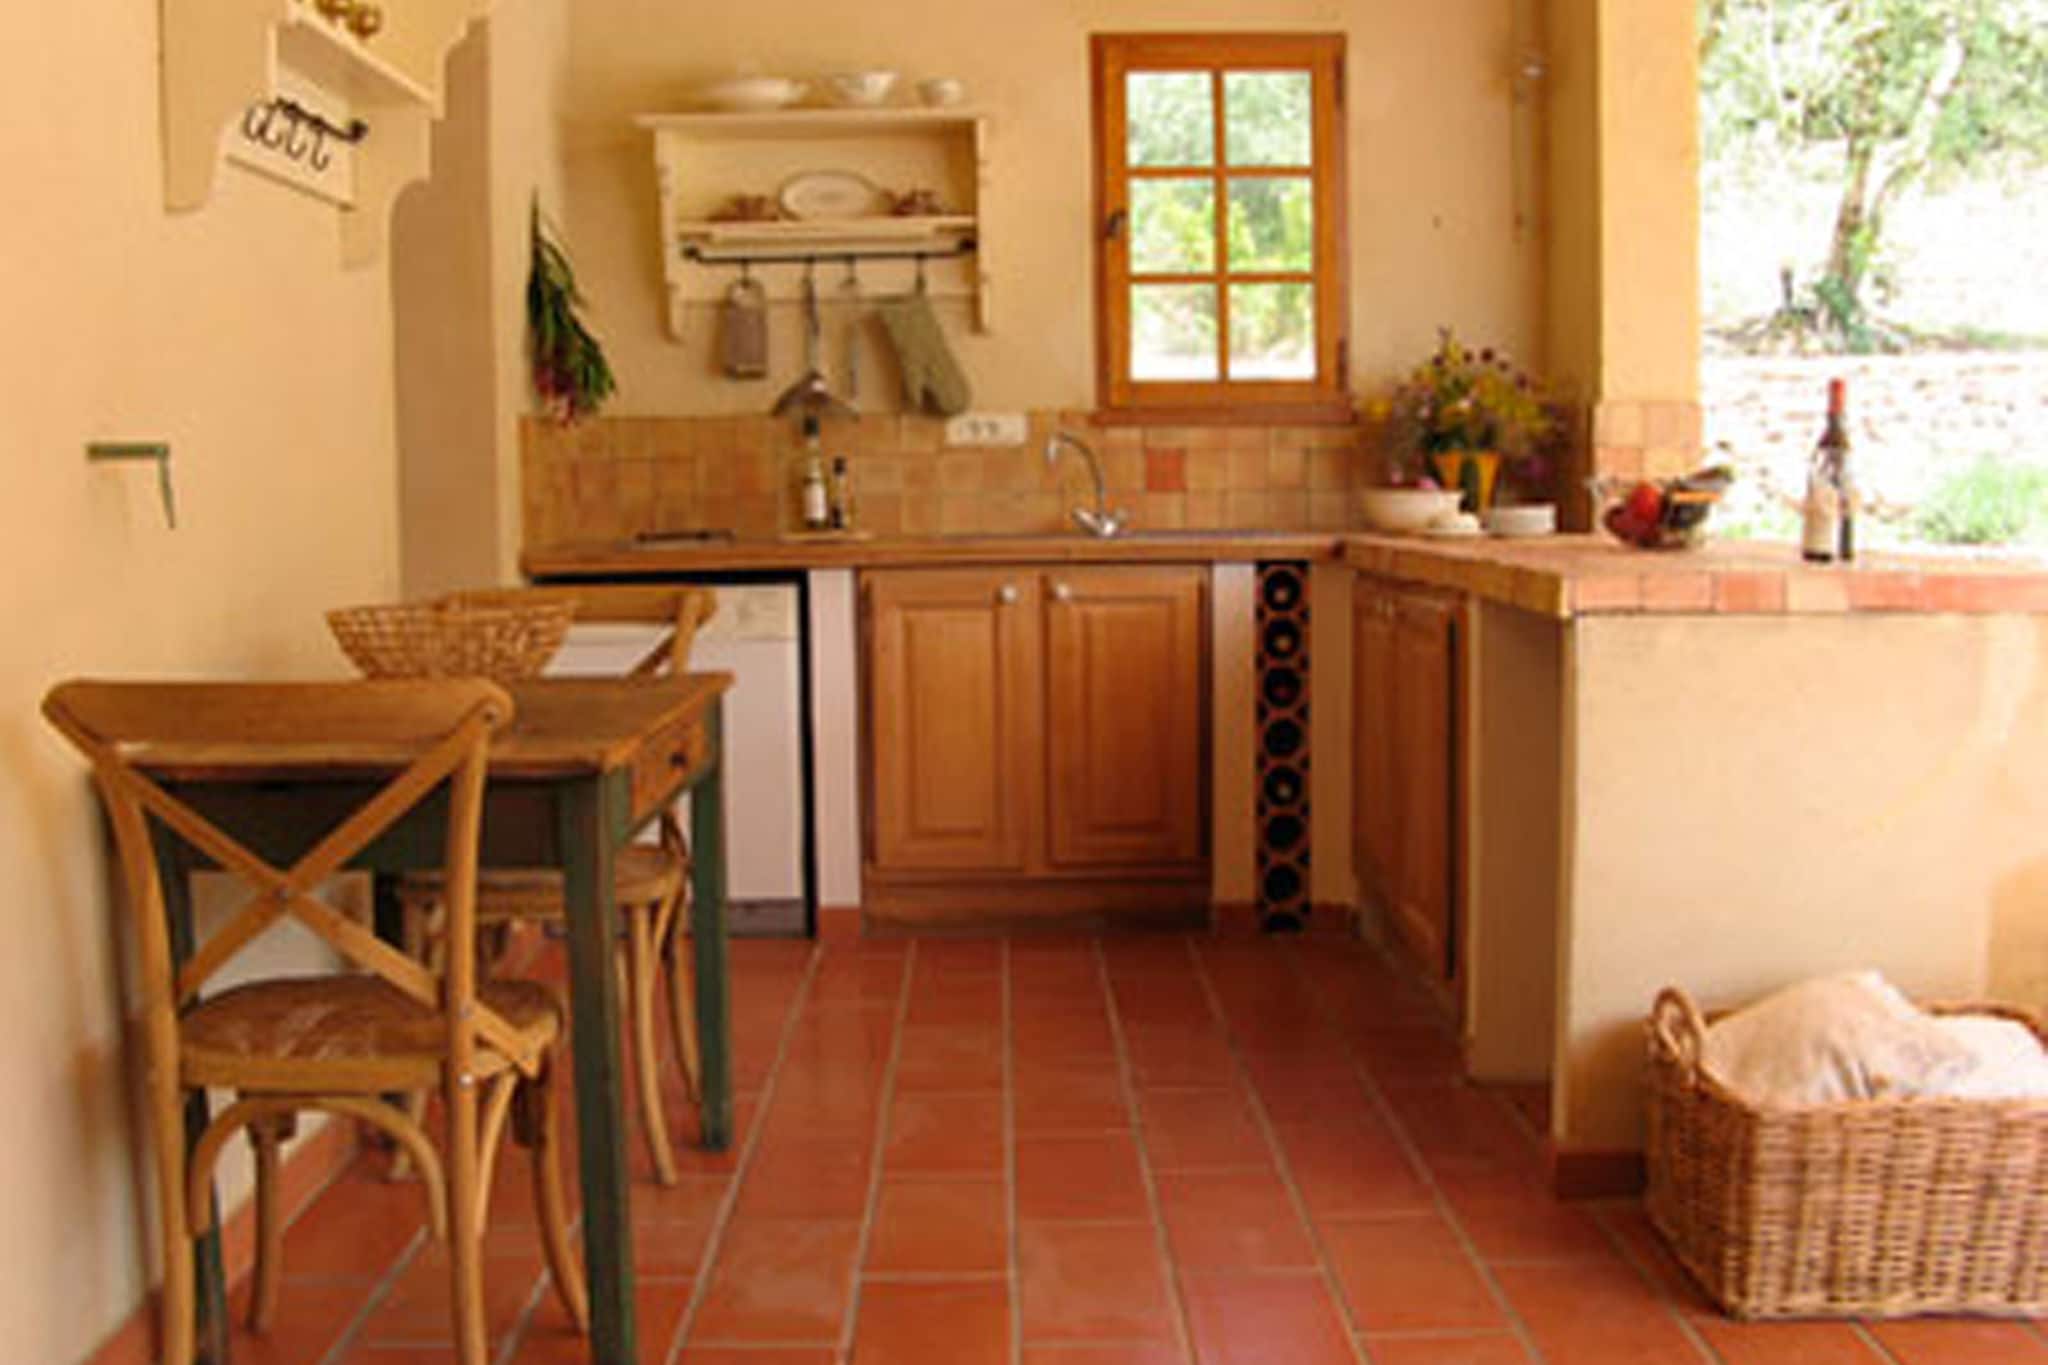 Provencal holiday home with private pool on 3000 m2 of garden, in the middle of the Luberon